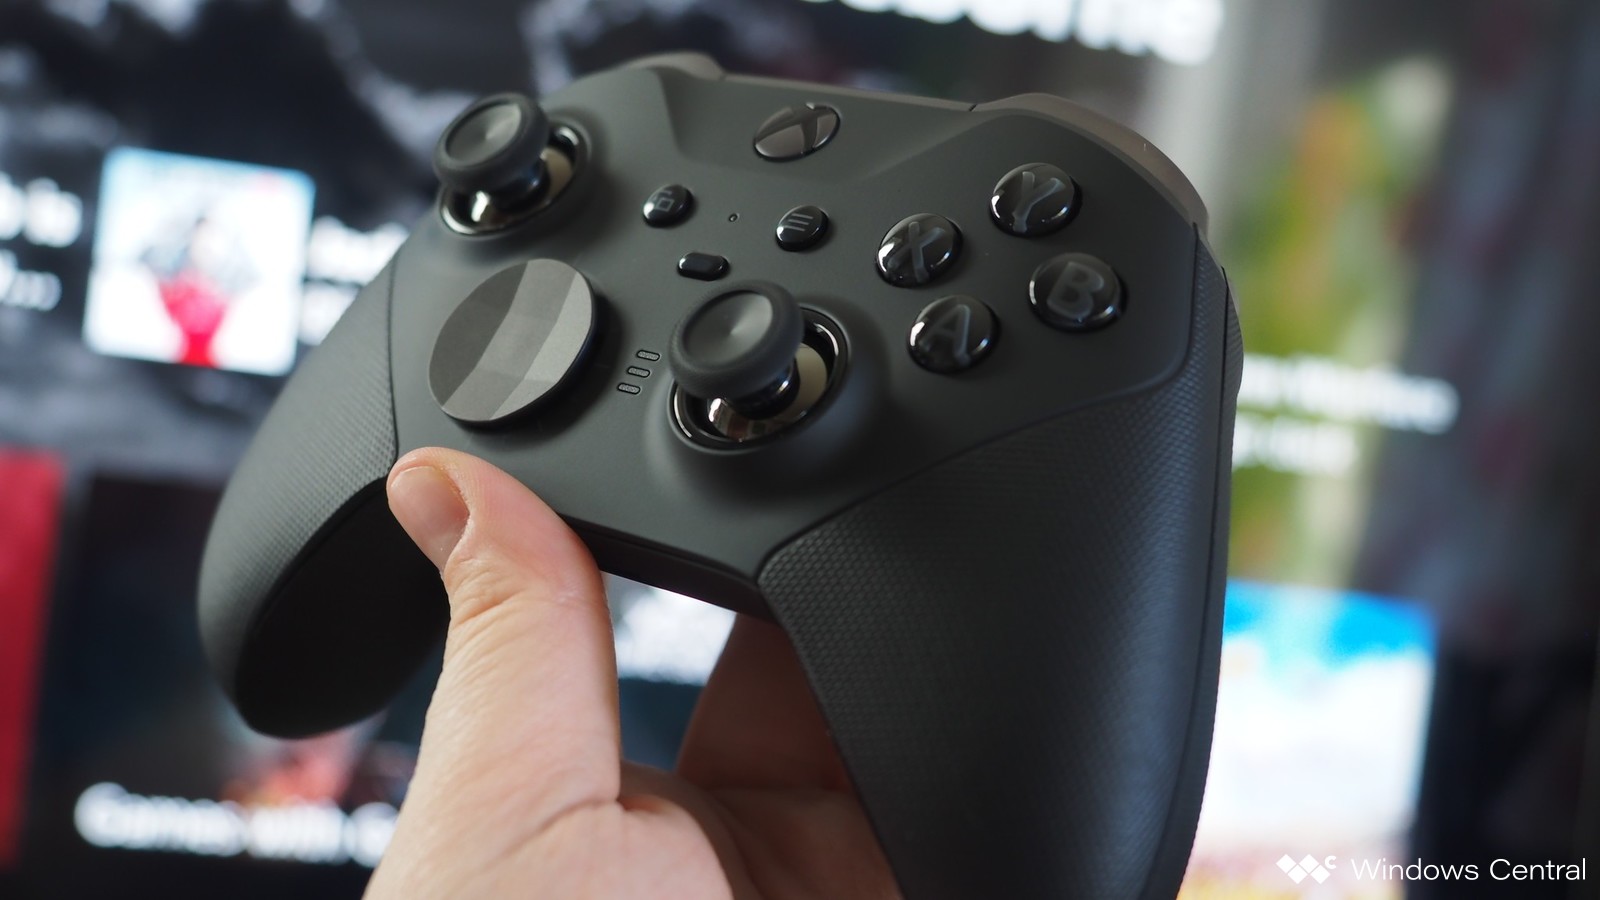 How TO Choose modded xbox one controller in 2020?